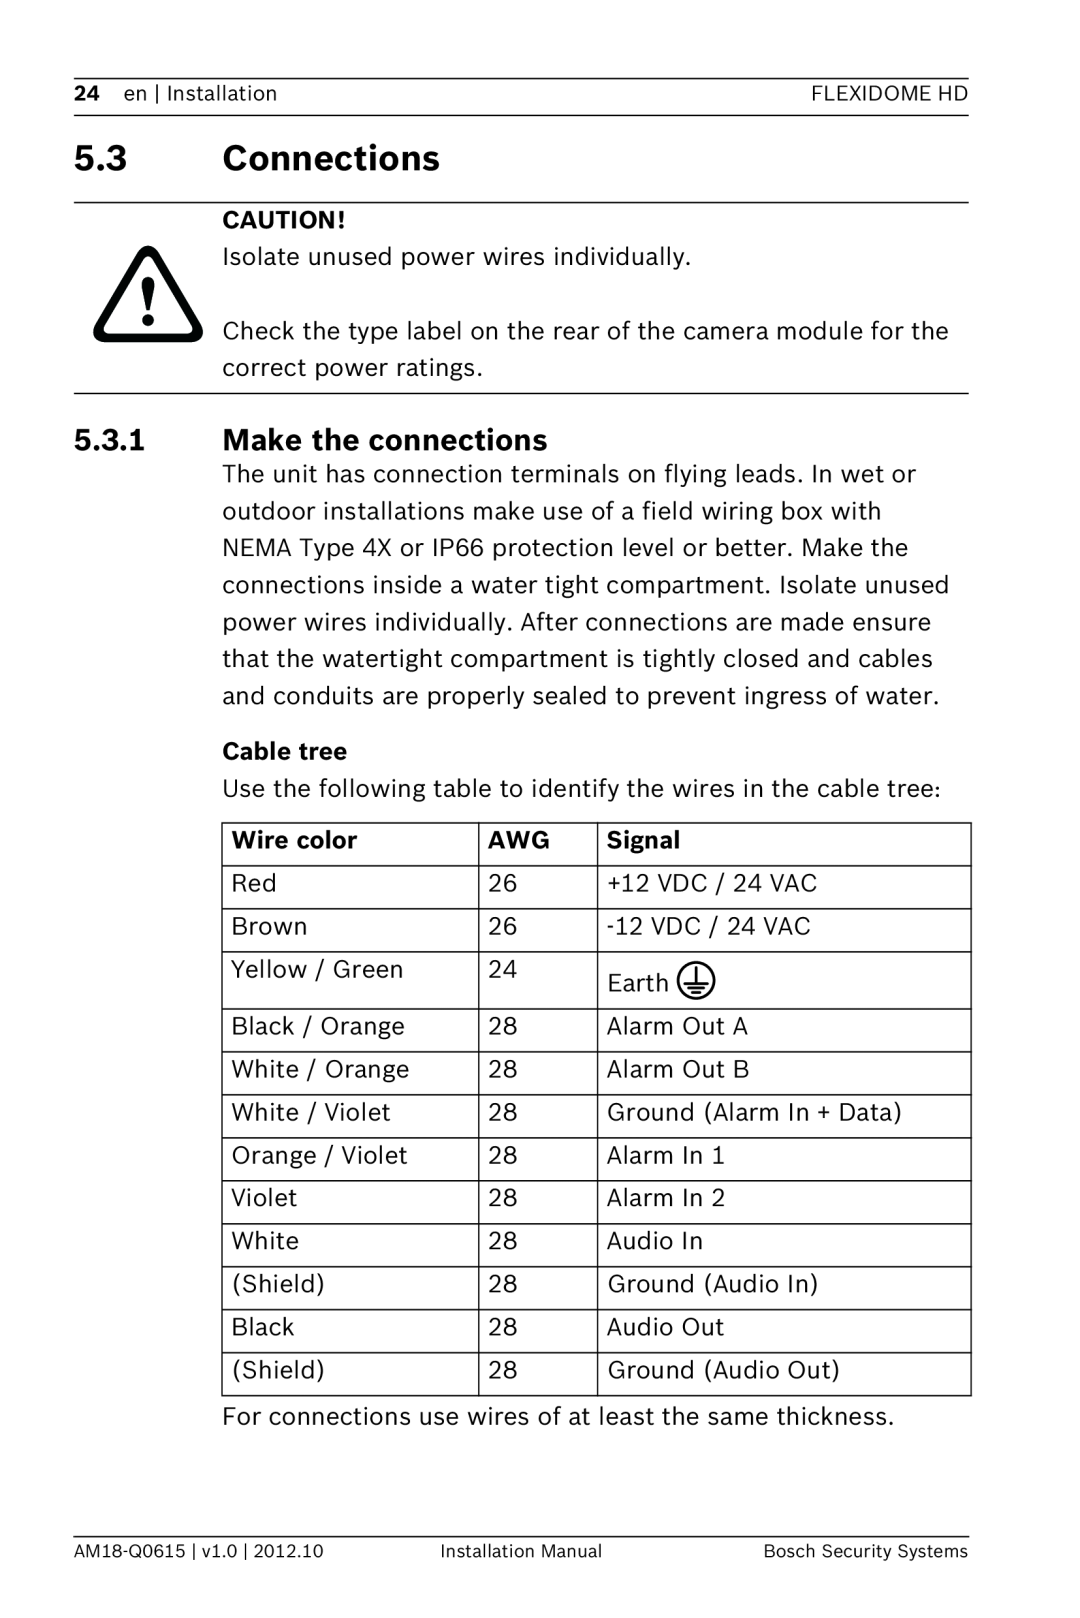 Bosch Appliances NDN-733 installation manual 5.3Connections, 5.3.1Make the connections, Cable tree, Wire color, Signal 